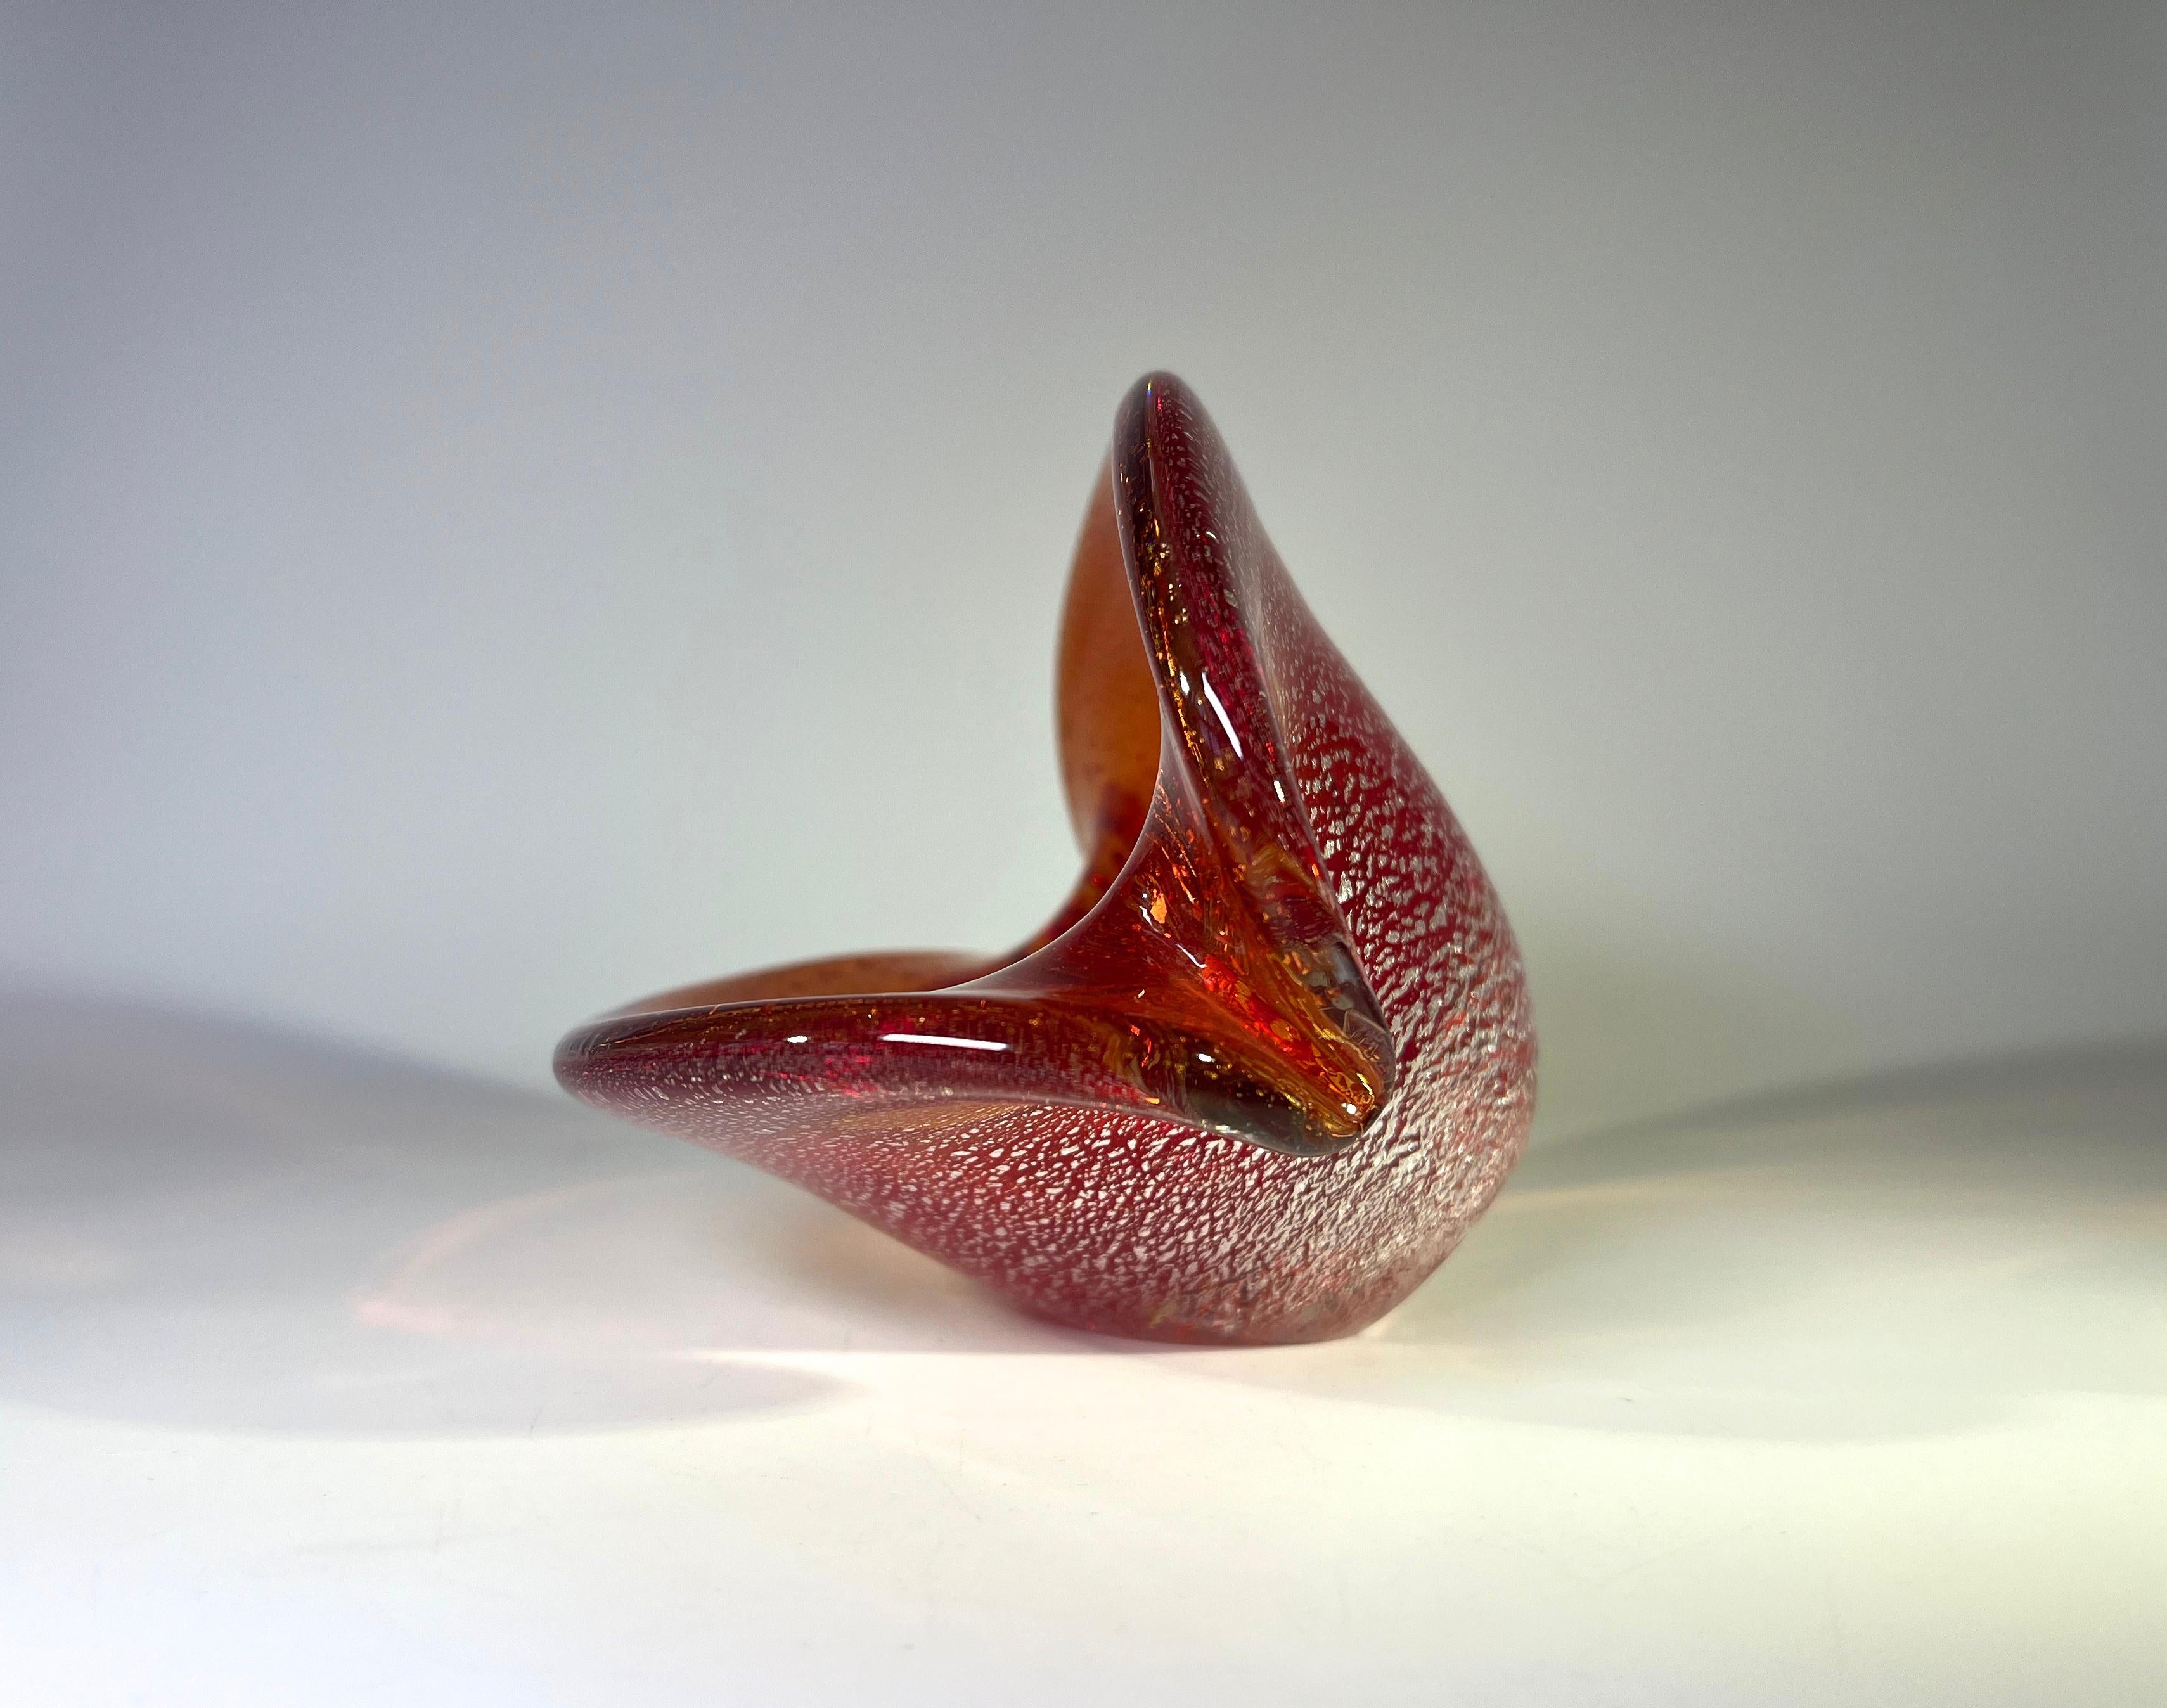 Hand-Crafted Luxuriant Liquid Amber And Silver Shards, Murano Glass Clam Shell Vase For Sale